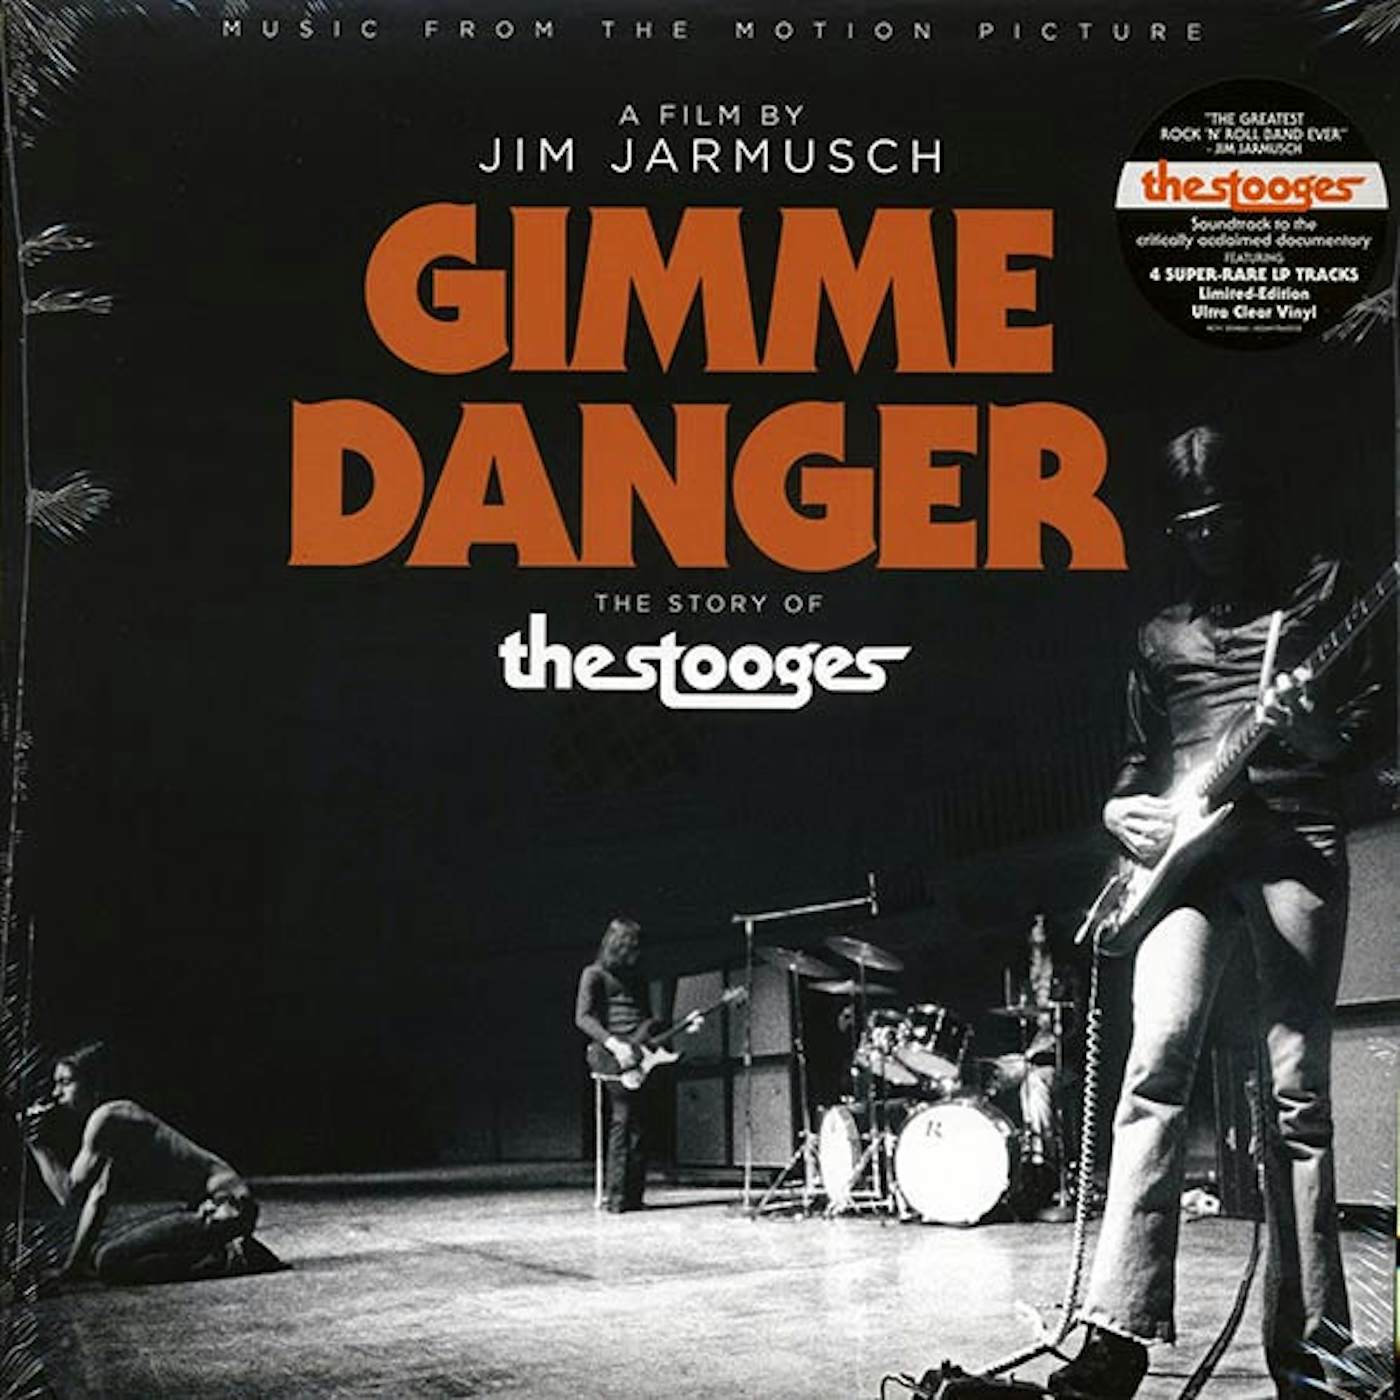 The Stooges  LP -  Gimme Danger: Music From The Motion Picture (ltd. ed.) (clear vinyl)